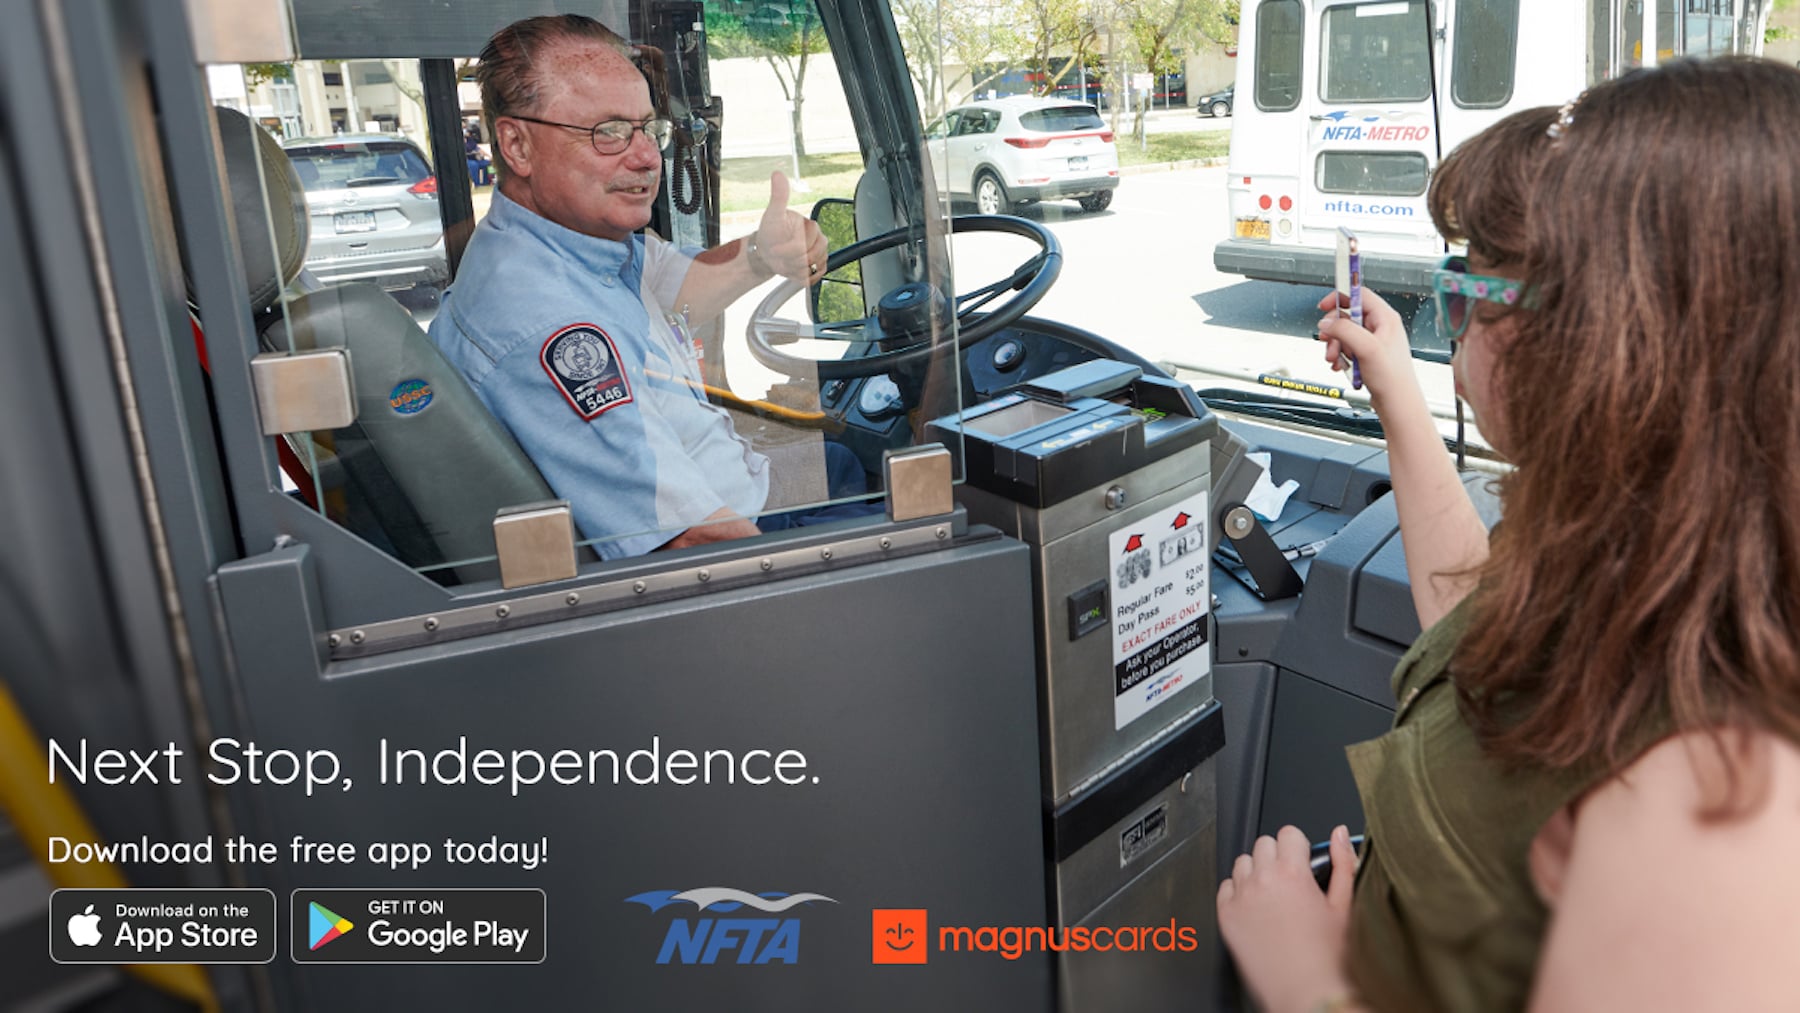 MagnusCards and Niagara Frontier Transit Authority partnership ad featuring a young woman boarding a bus independently.